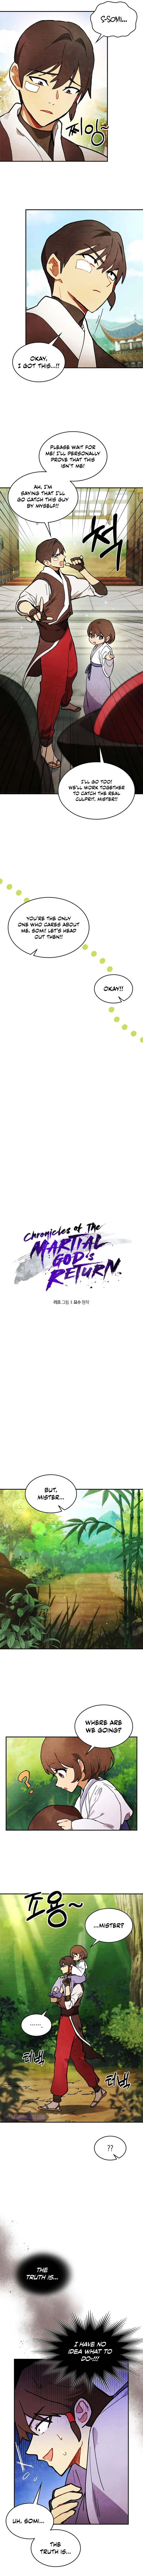 chronicles-of-the-martial-gods-return-chap-29-4